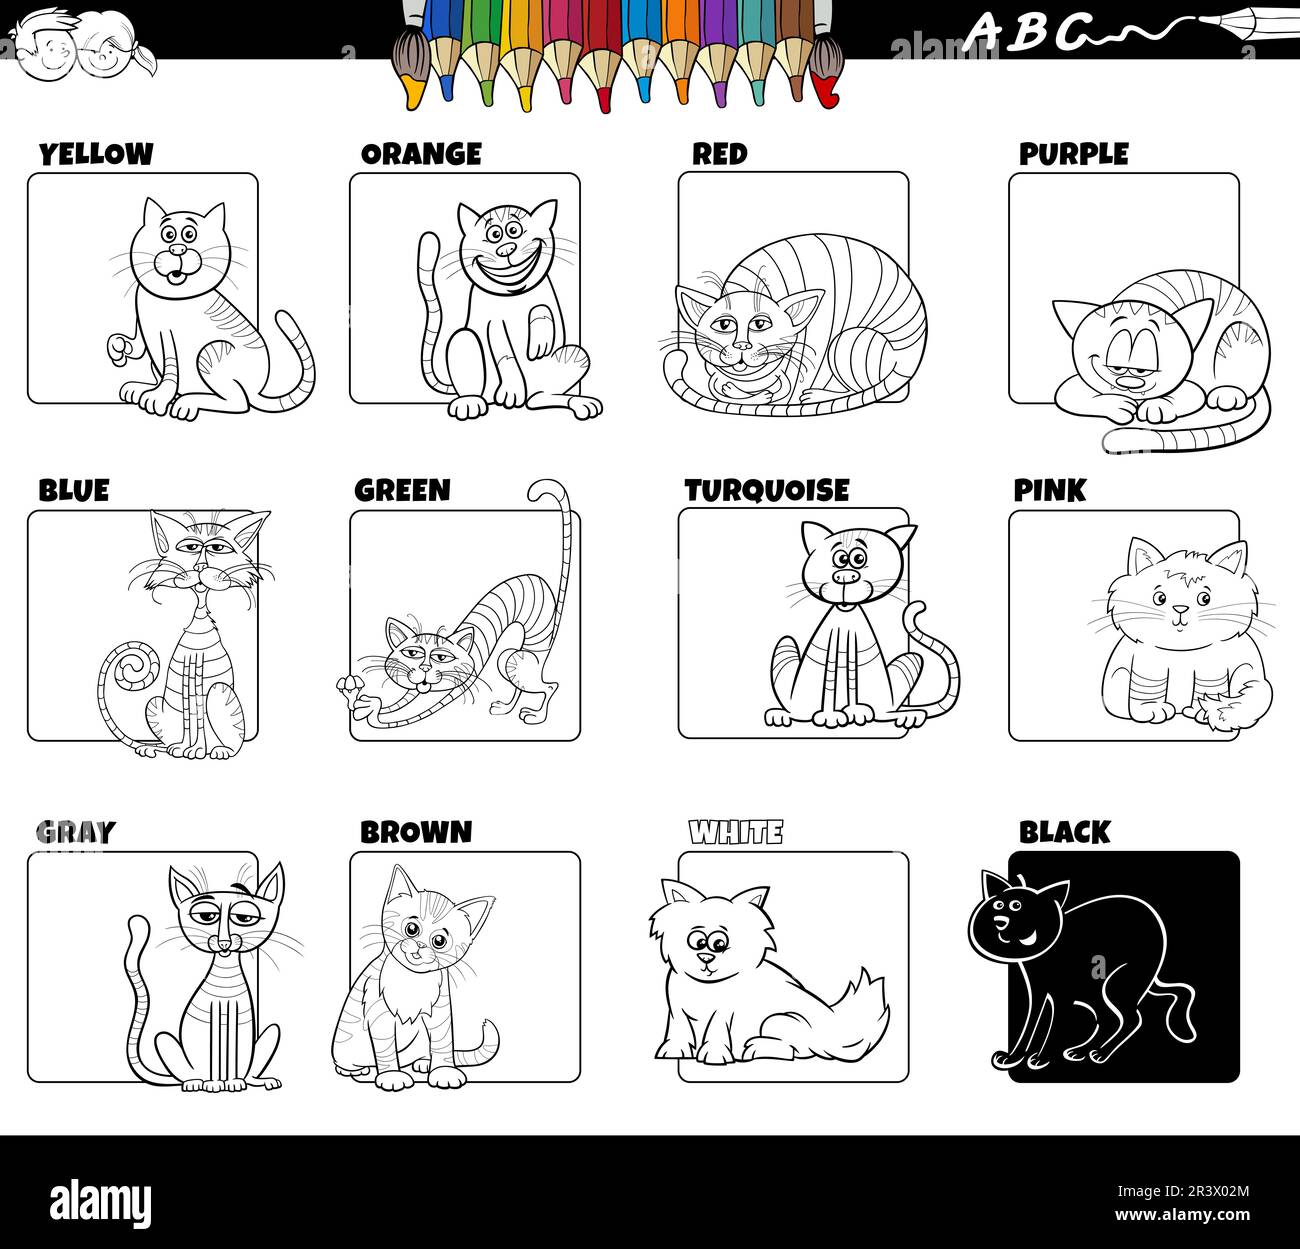 Basic colors with cats characters set coloring page Stock Photo